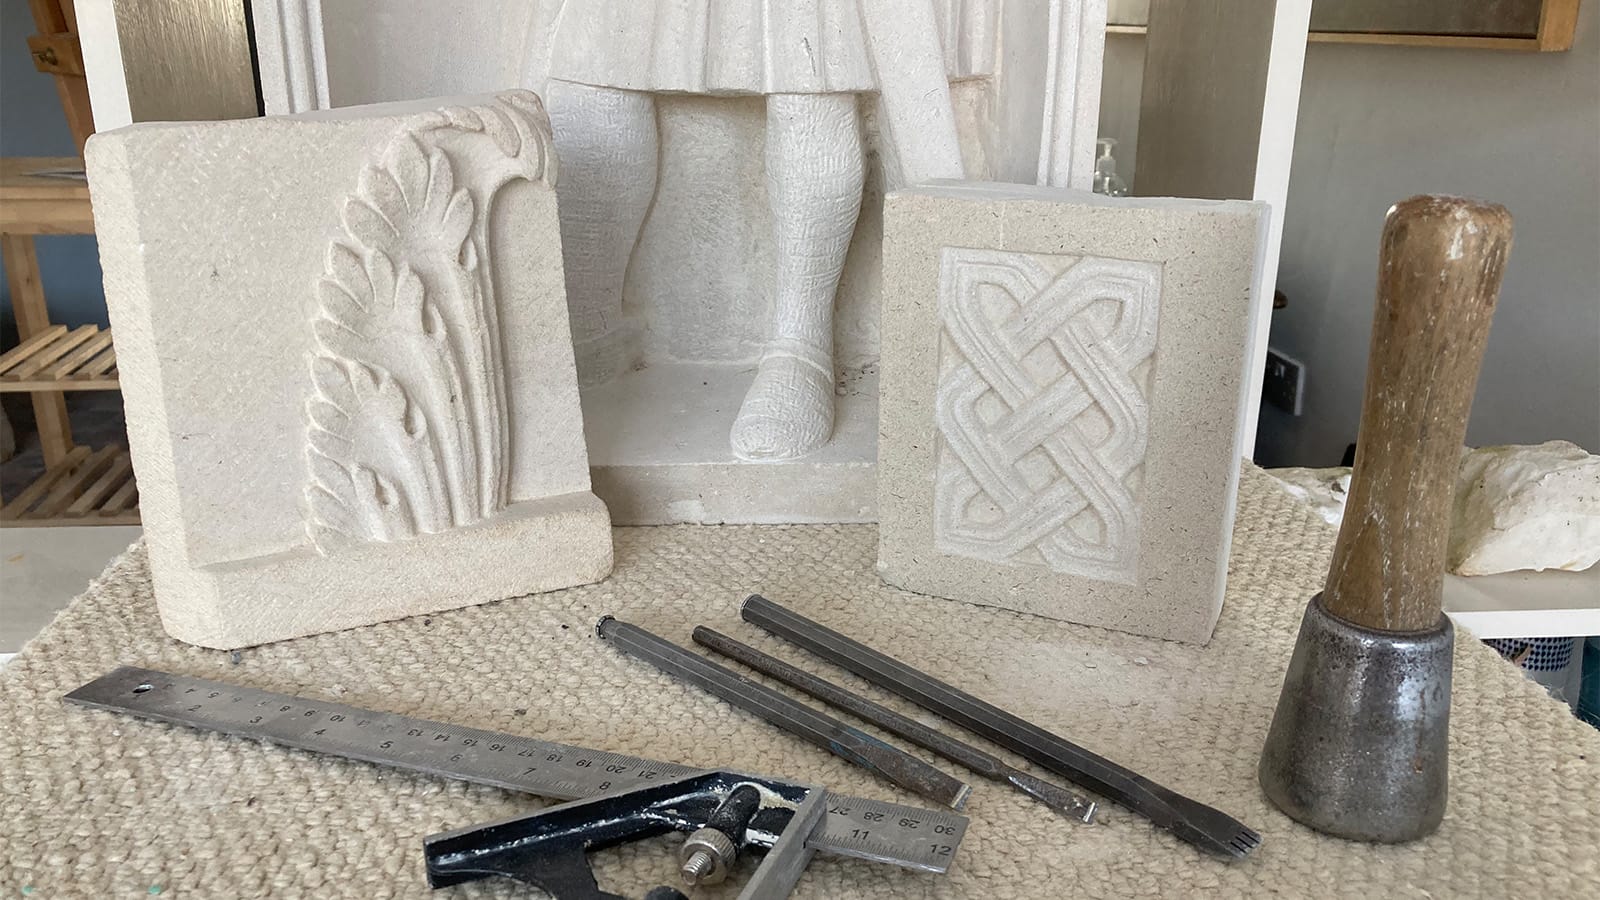 A selection of stone carving tools in front of stone carved with ornate patterns